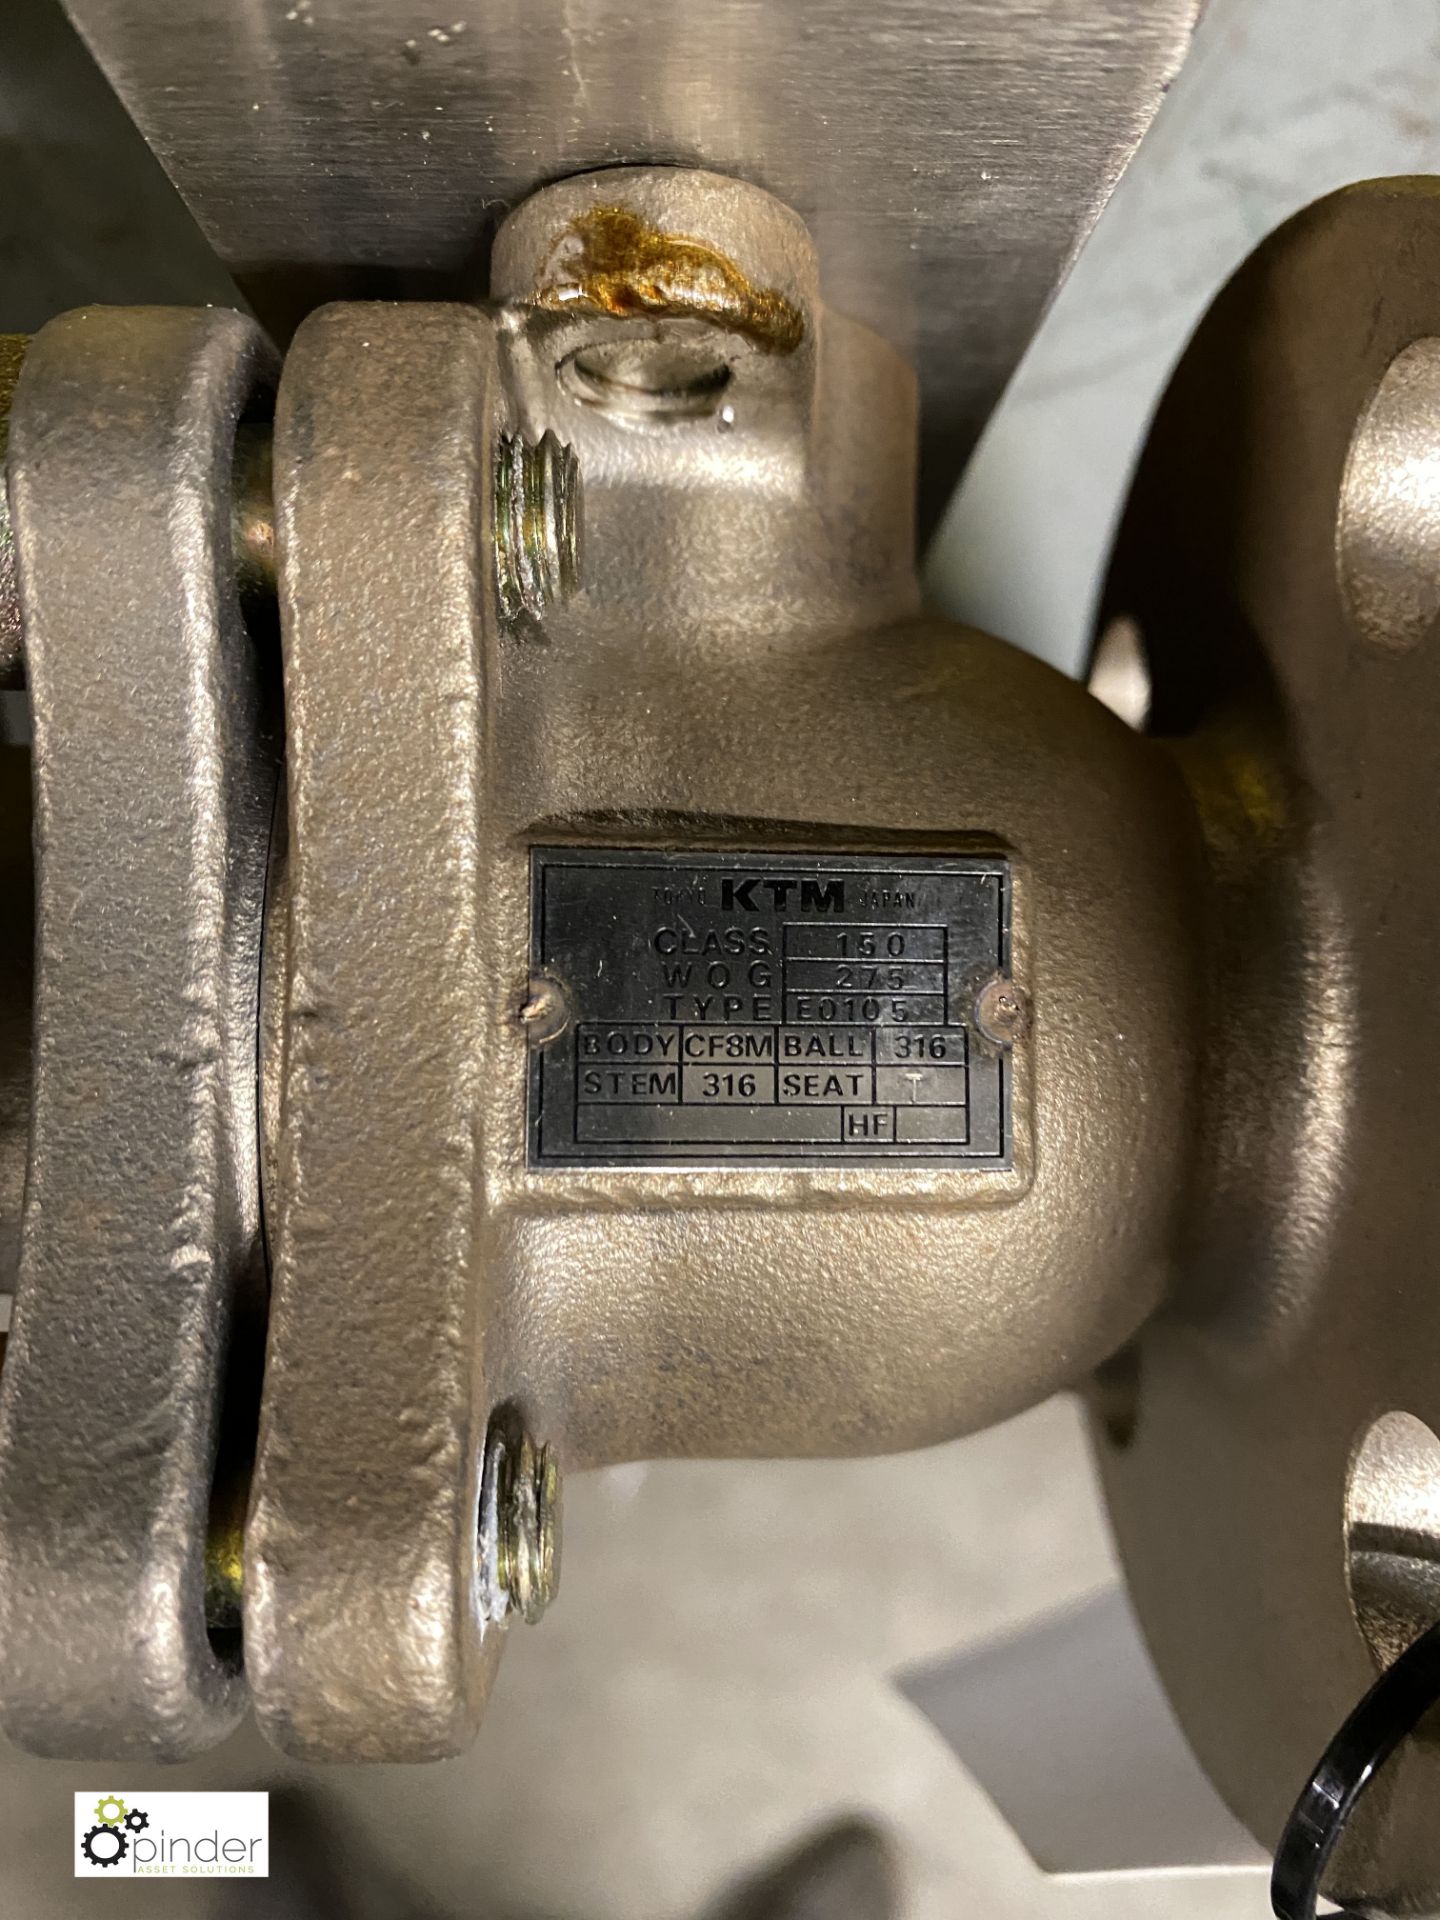 KTM Flanged Ball Valve 1” (DN25) Type E0105, WOG 2 - Image 2 of 3